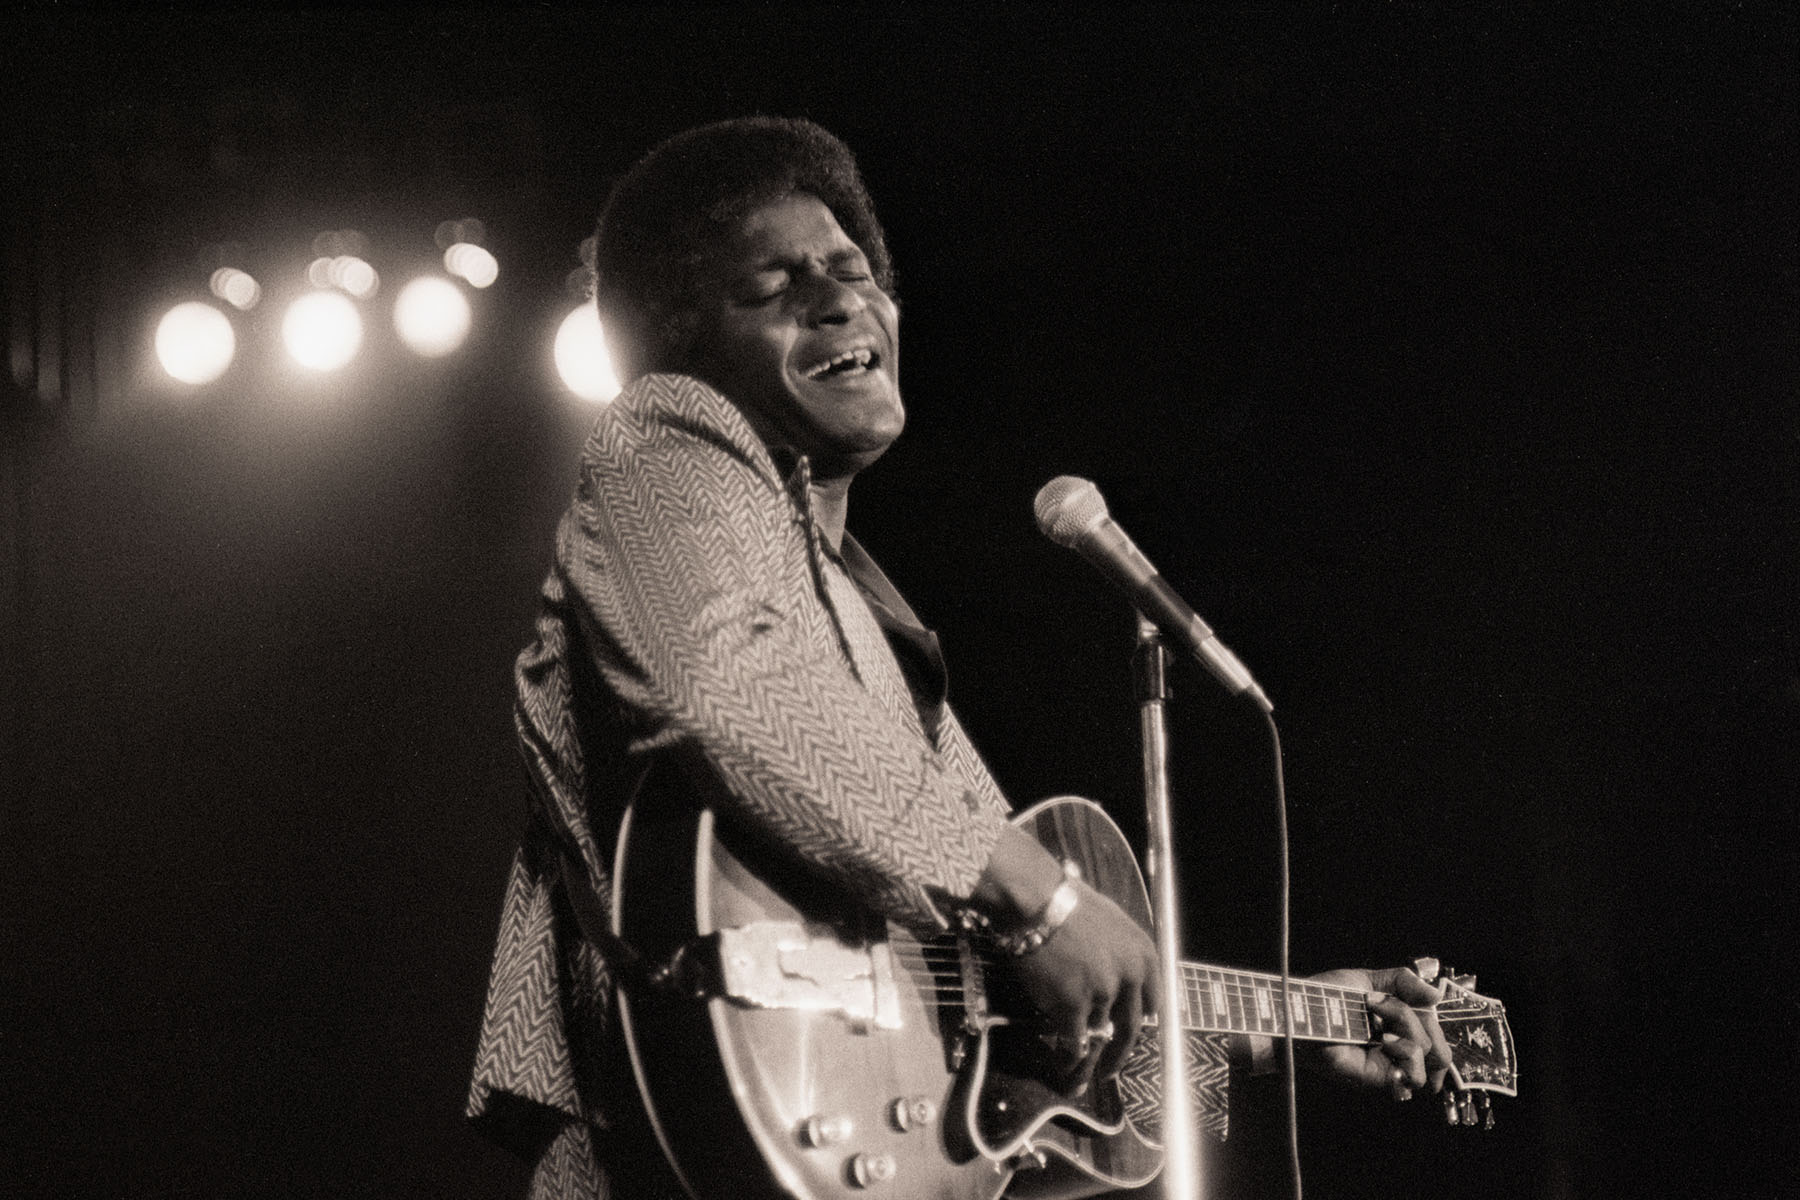 Charley Pride performs on stage at Madison Square's Felt Forum.